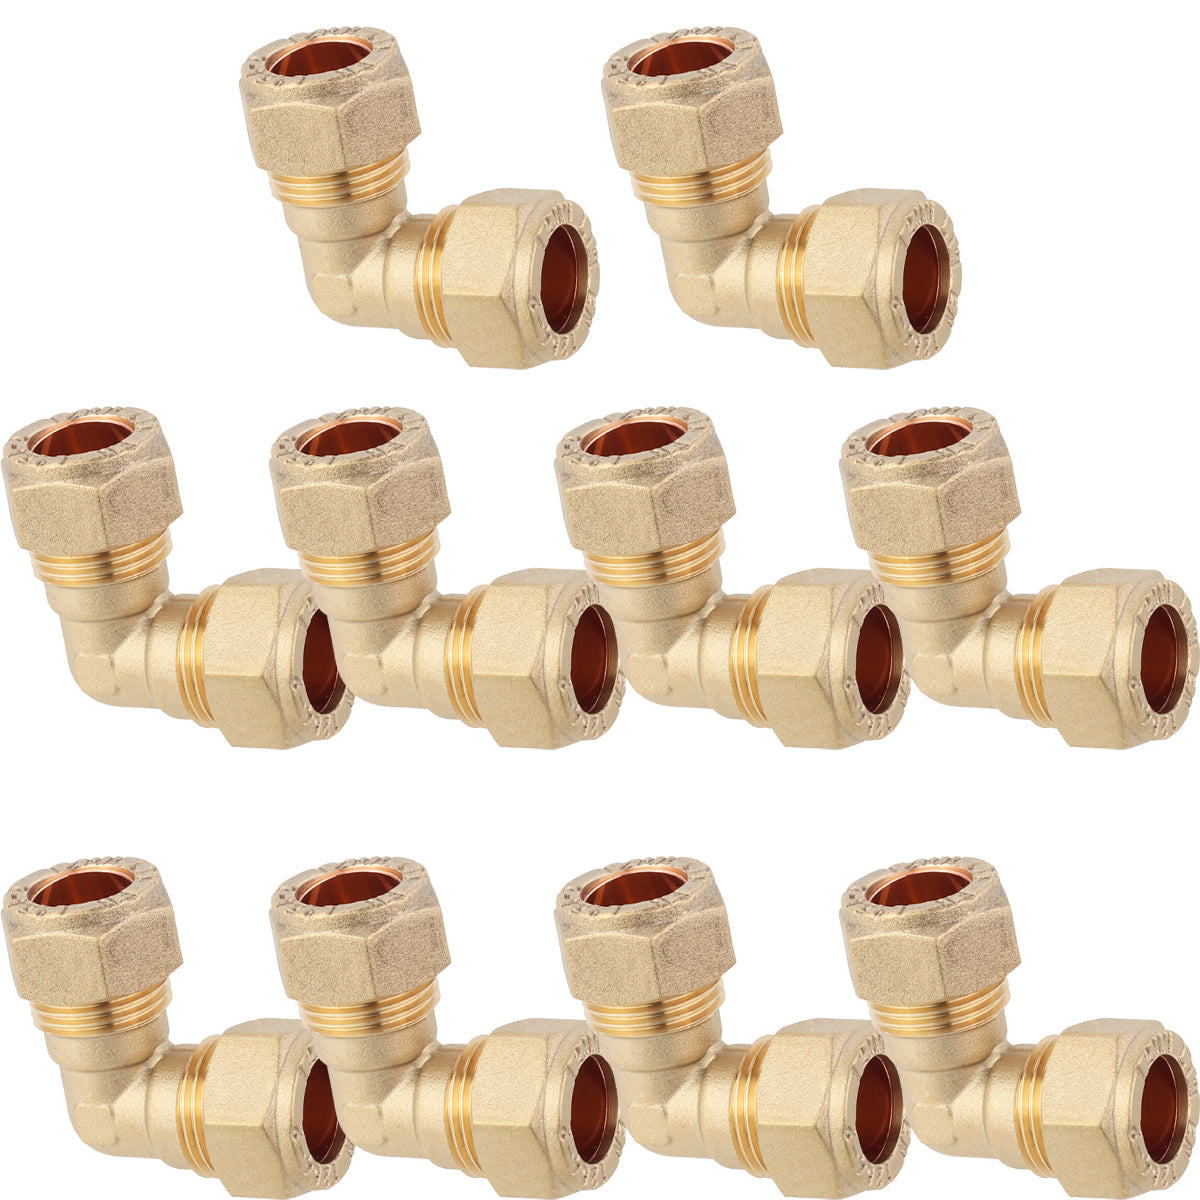 LTWFITTING 12MM OD 90 Degree Compression Elbow, Brass Compression Fitting (Pack of 10)